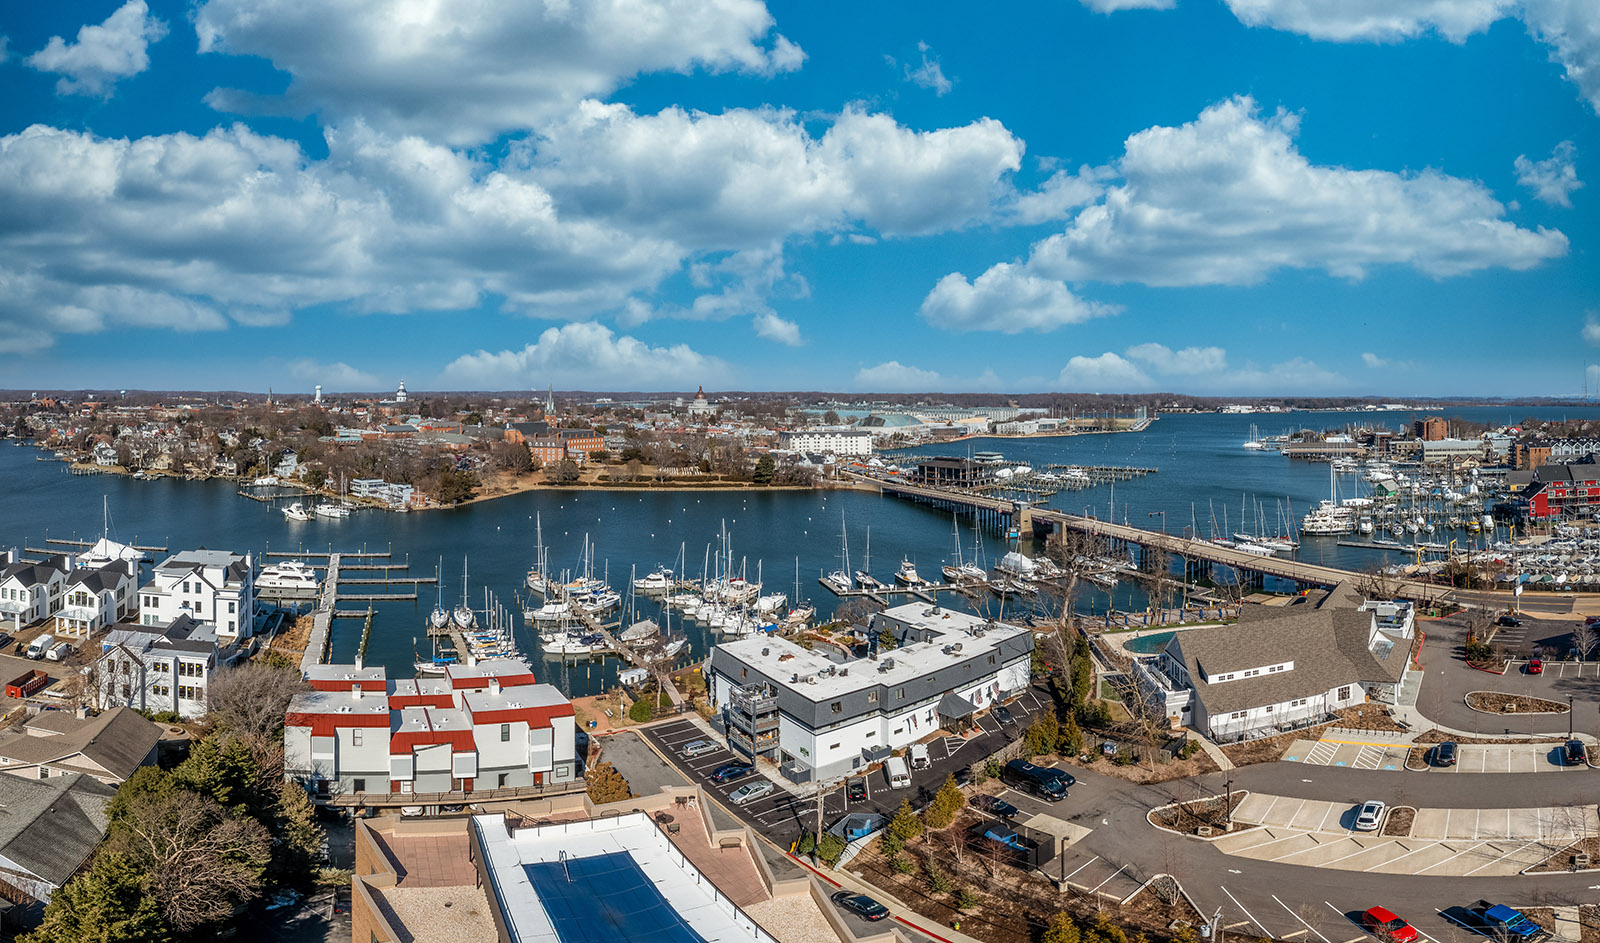 Aerial panorama of Annapolis harbor with luxury sail boats docked